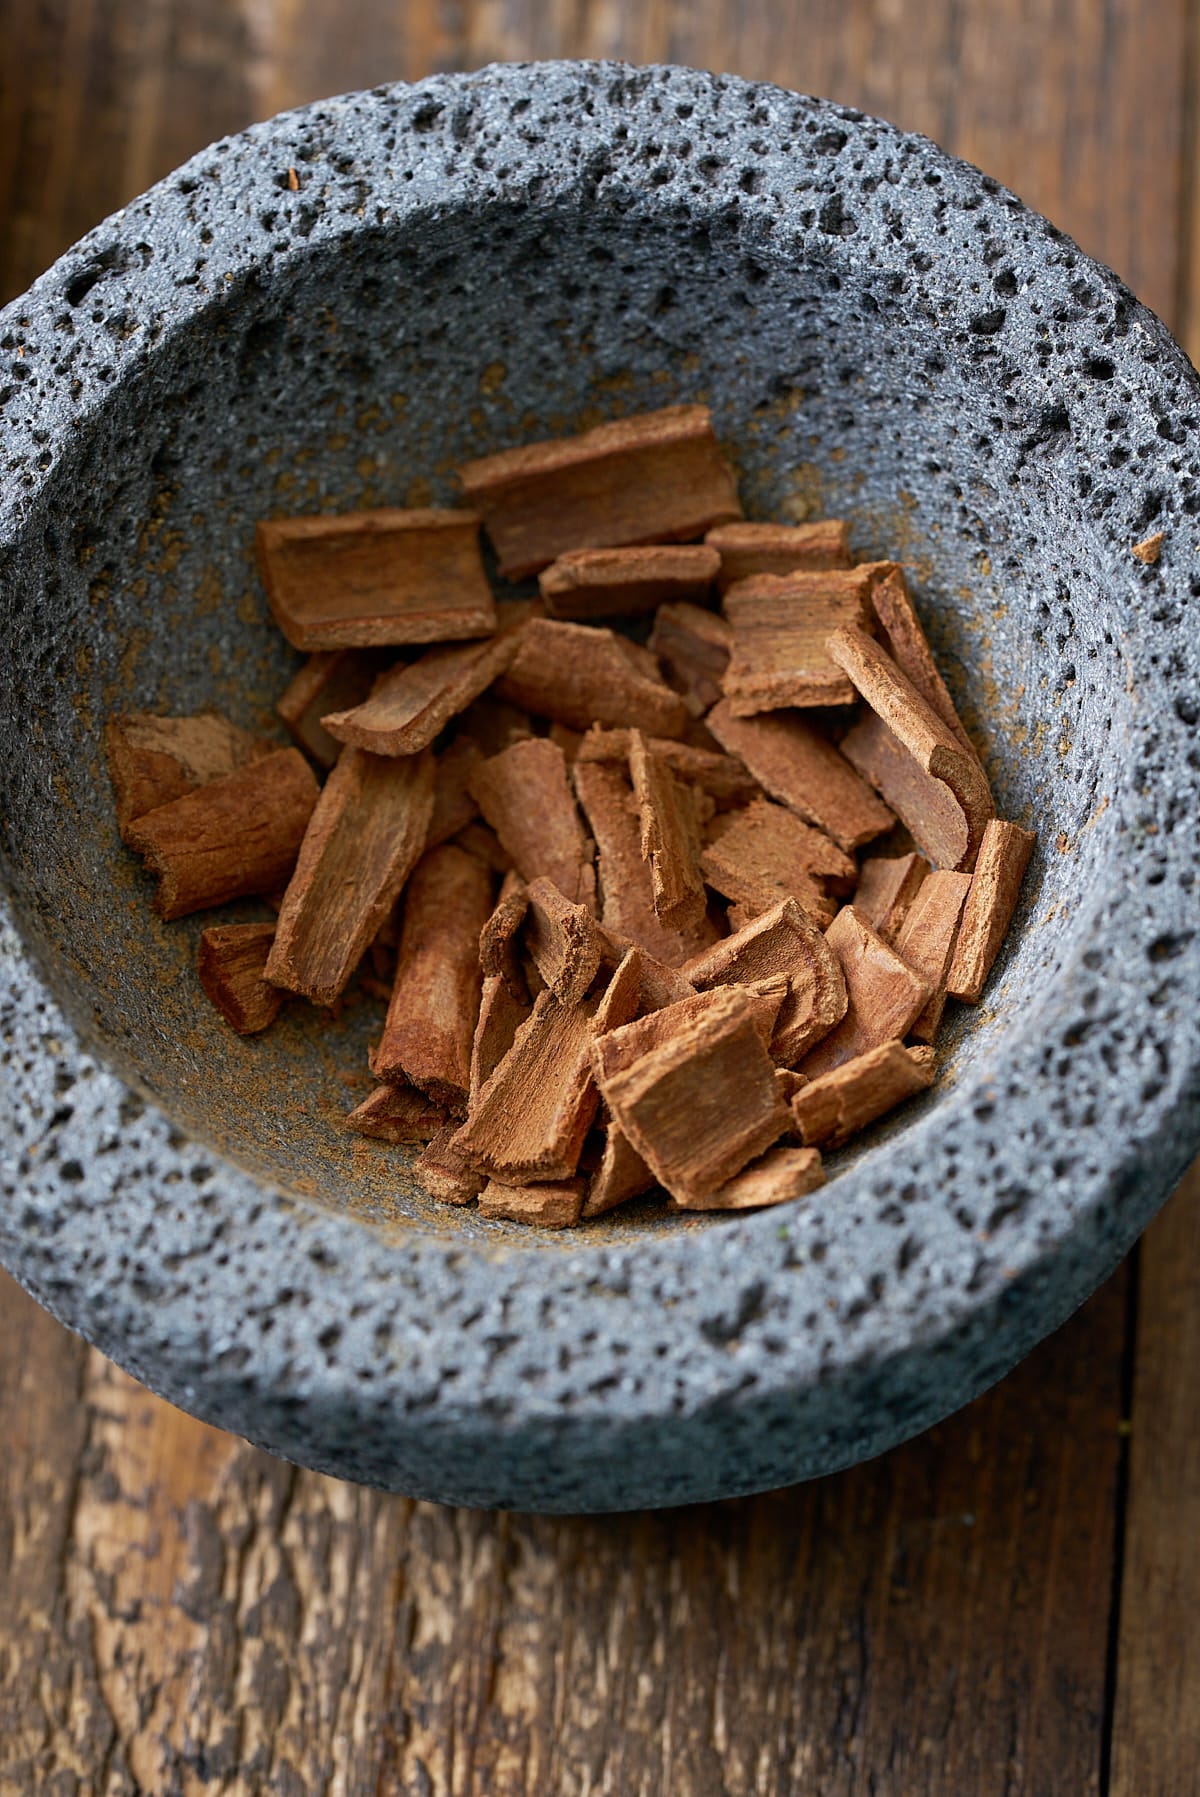 A pestle and mortar filled with crushed cinnamon sticks.